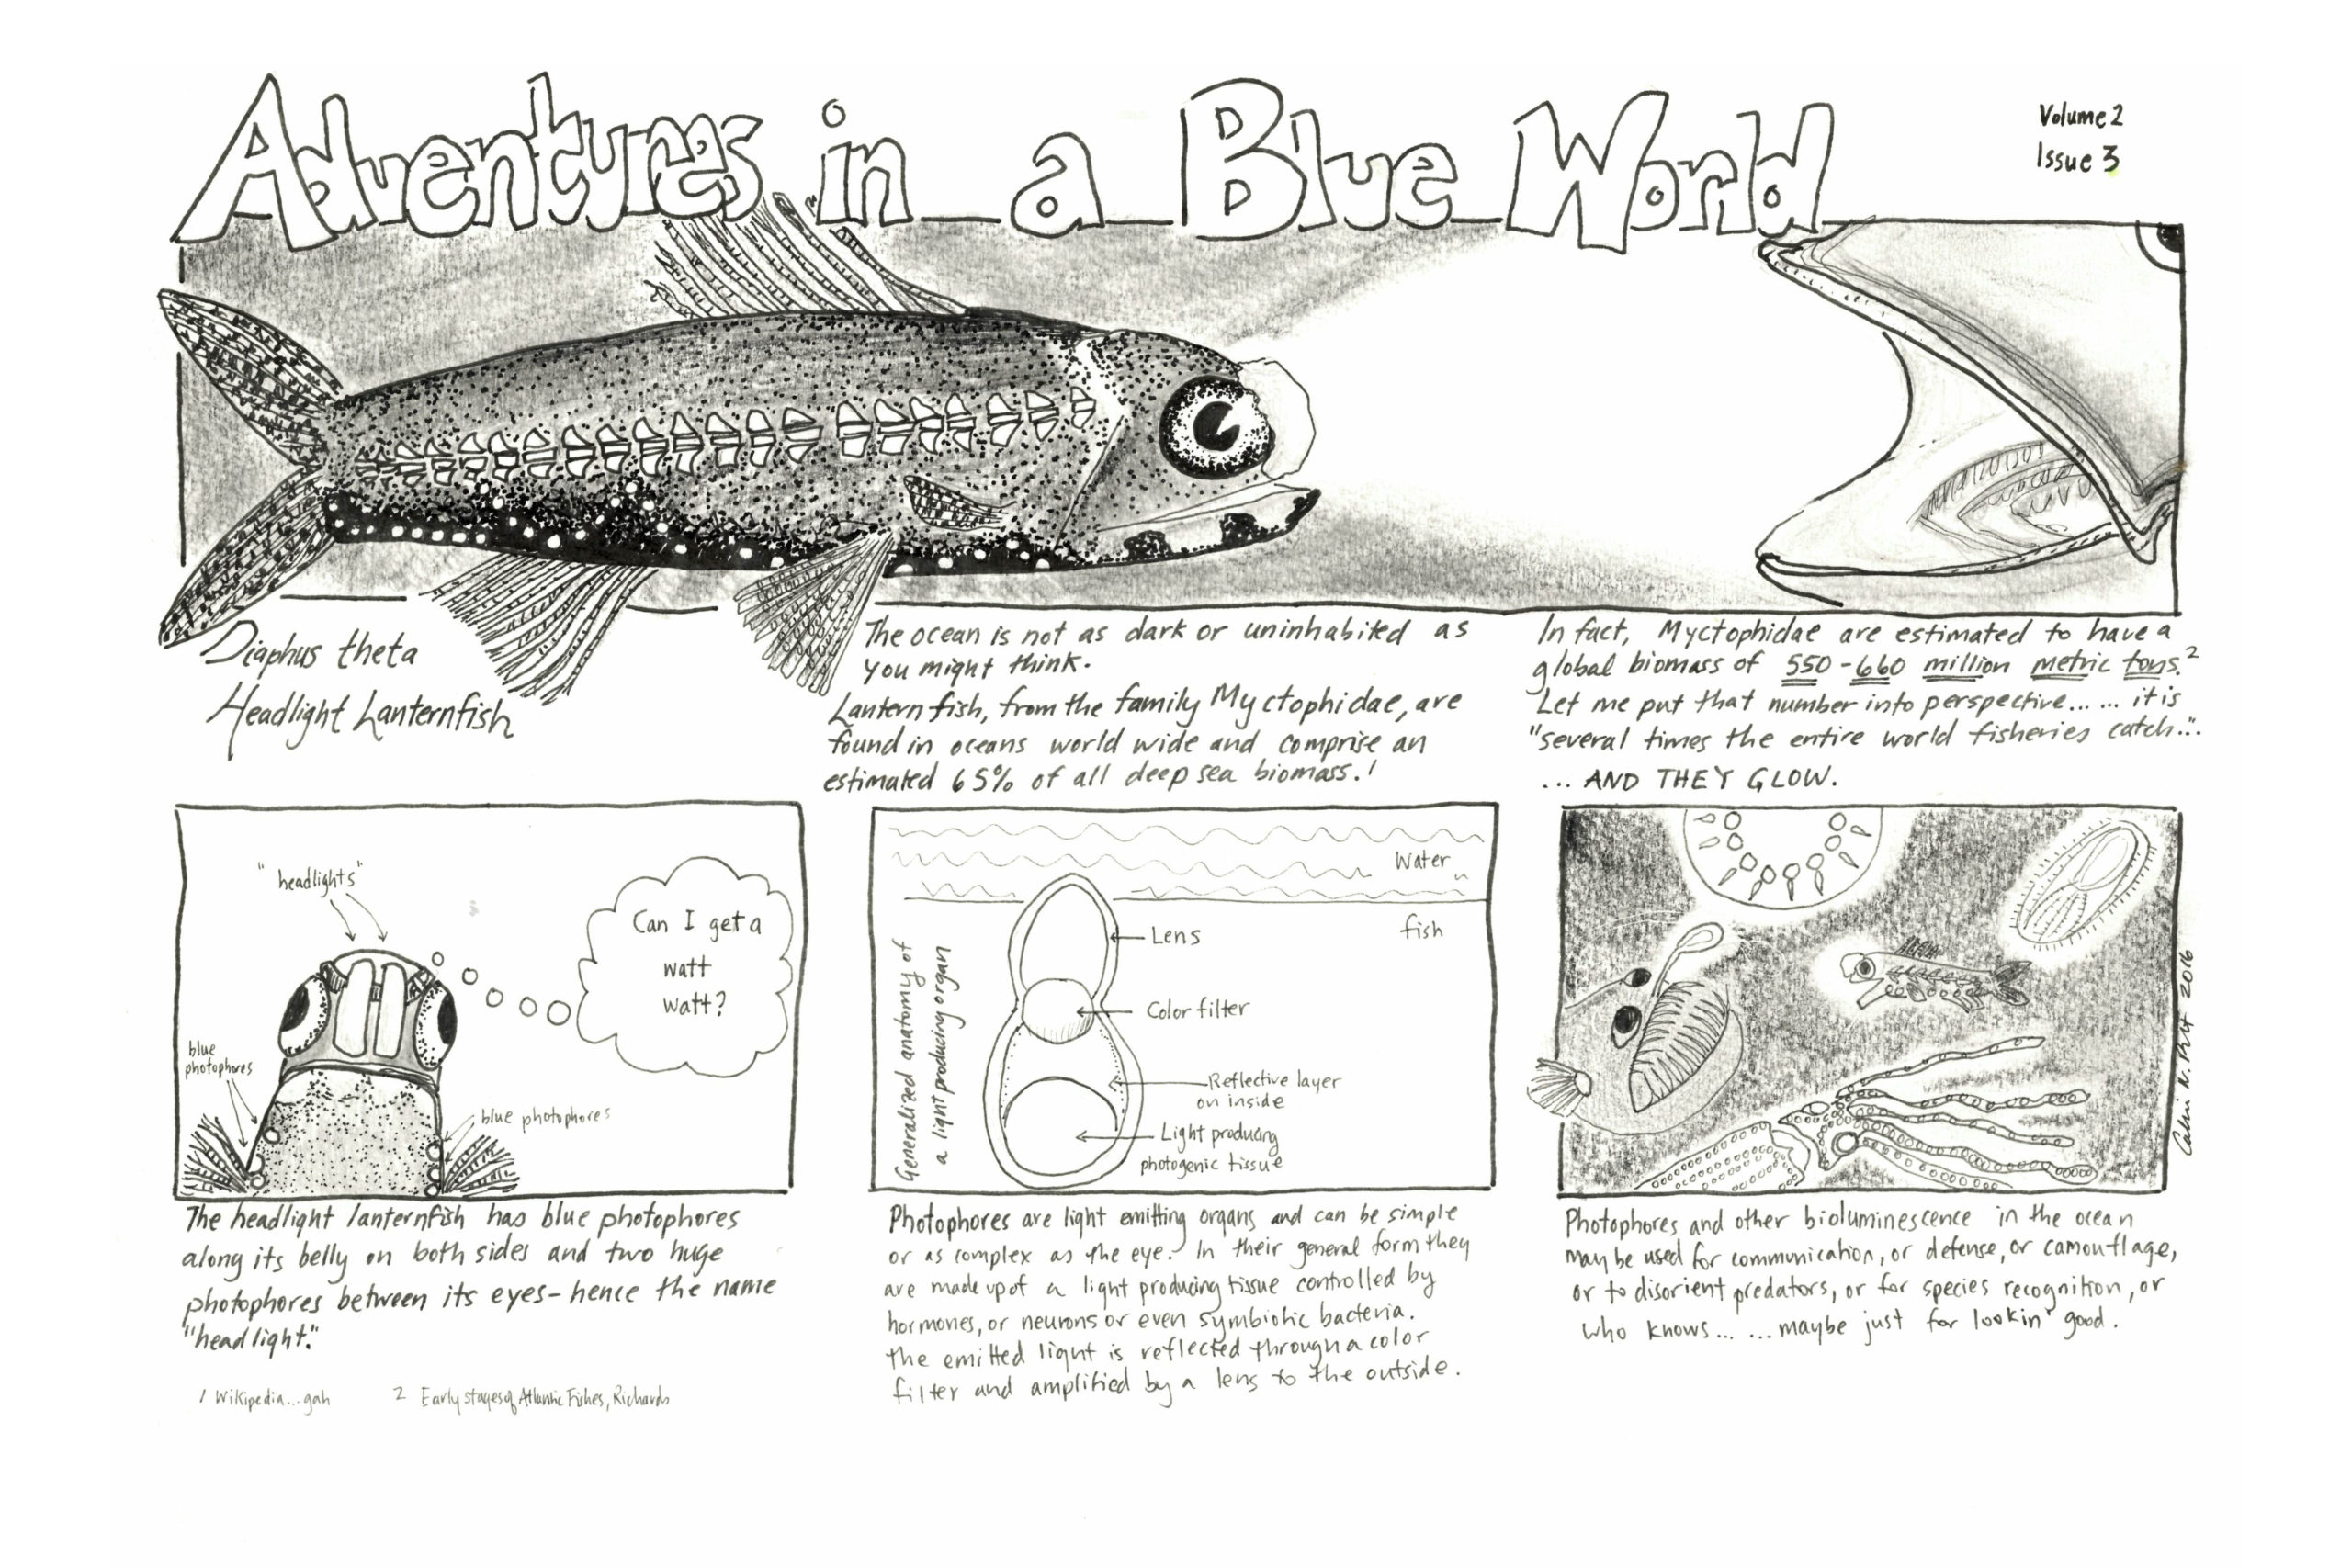 A four-panel cartoon entitled "Adventures in a Blue World" featuing images of a lanternfish and other deep sea creatures the are bioluminescent.